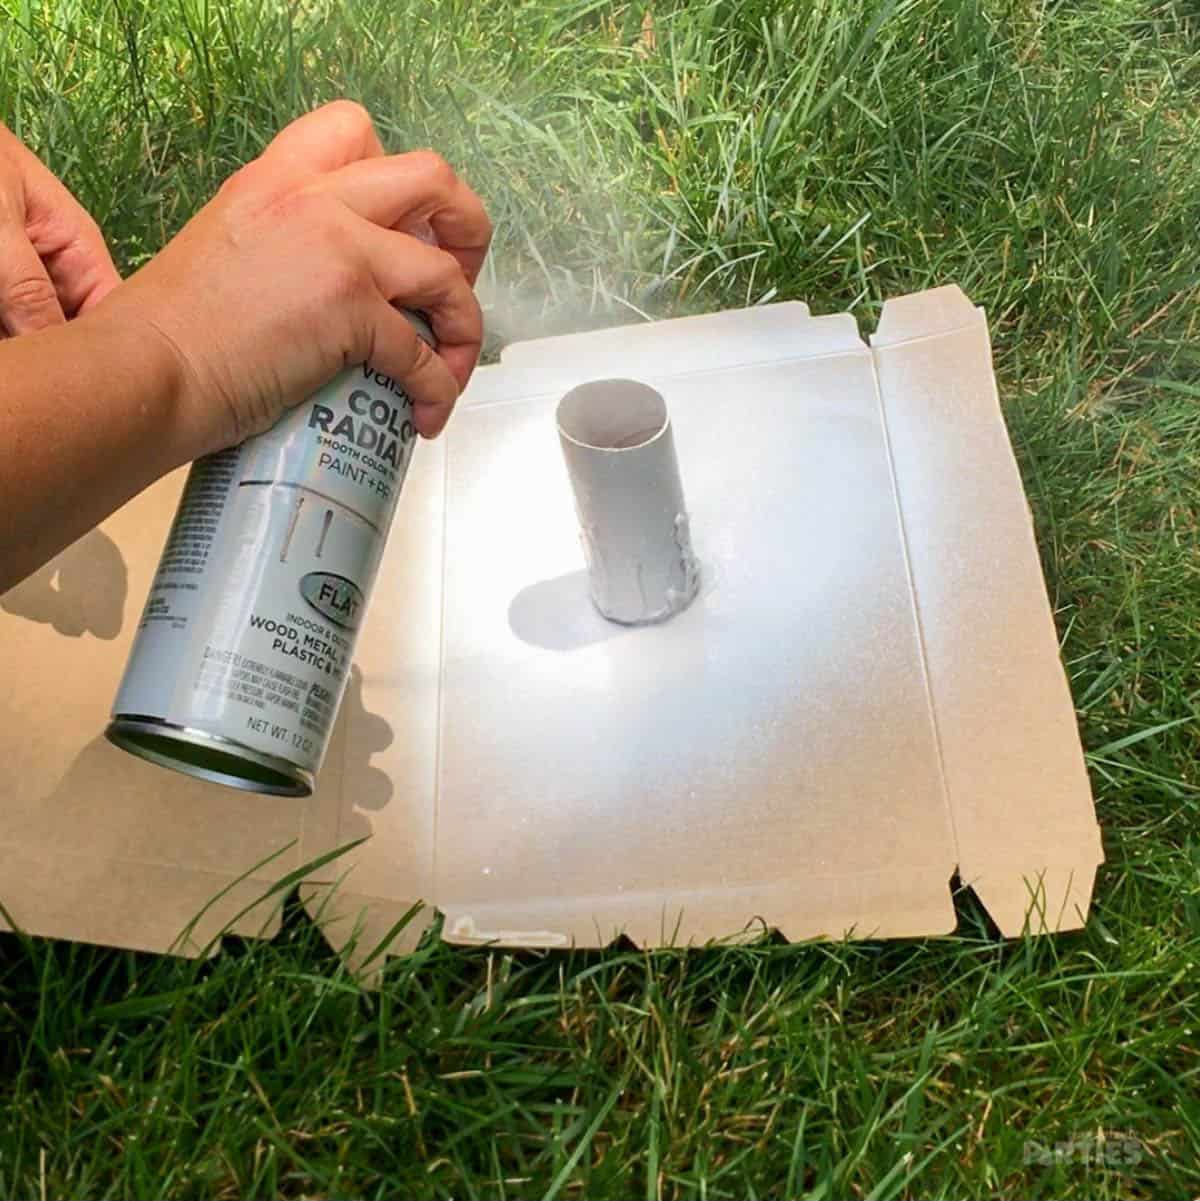 Spray painting a toilet paper tube with white paint.